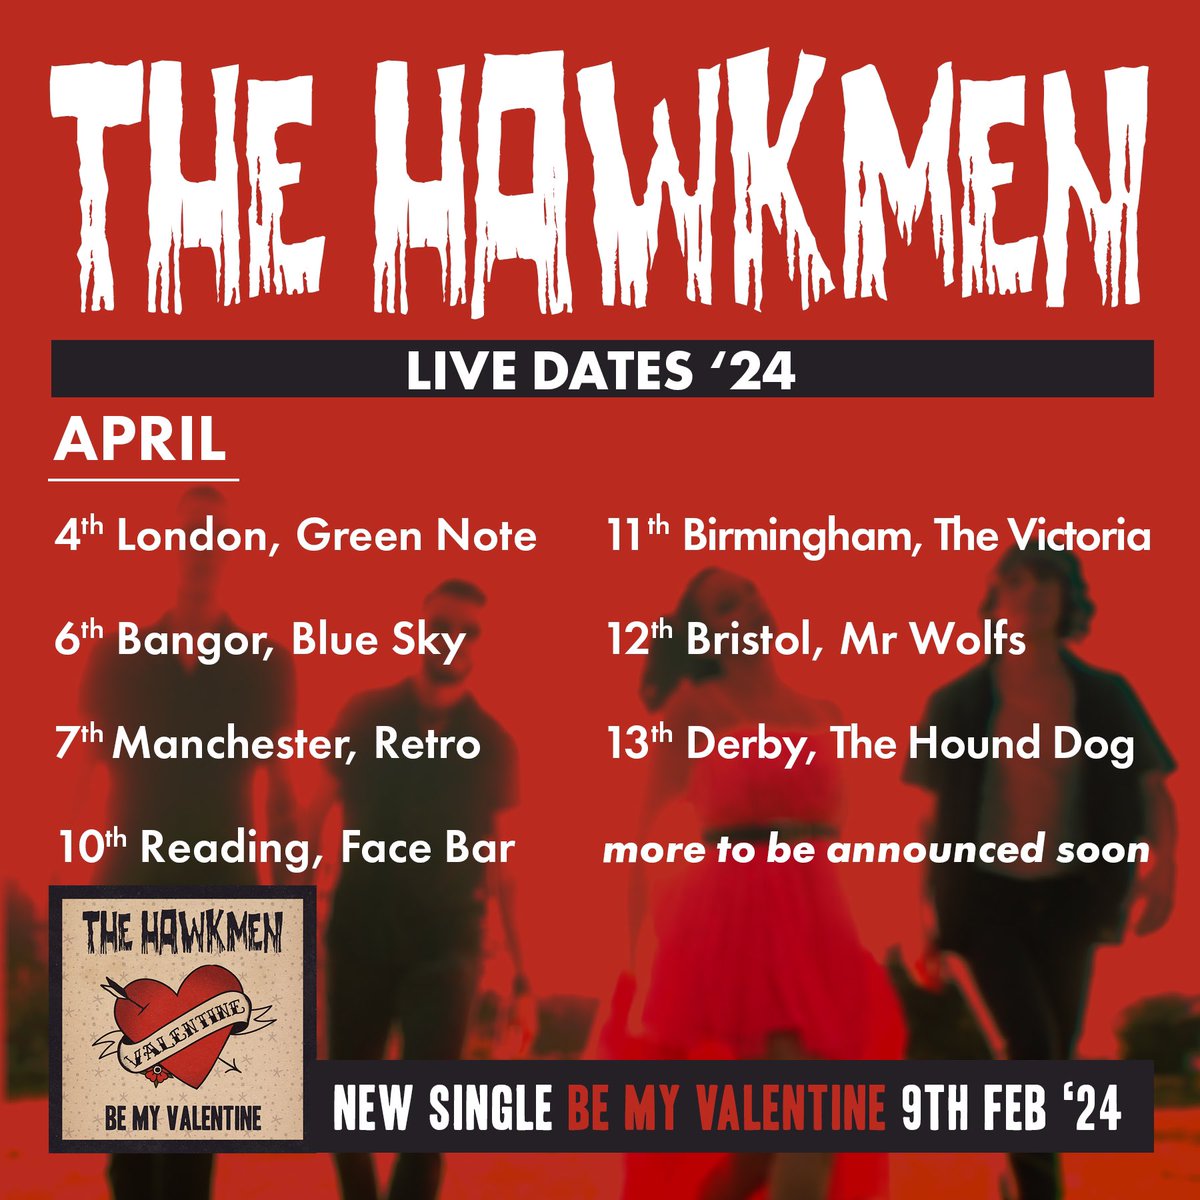 The Hawkmen in April 4th - Green Note, London greennote.co.uk/production/the… 6th - Blue Sky, Bangor wegottickets.com/event/606764/ 7th - Retro, Manchester fatso.ma/ZfhT 10th - Face Bar, Reading 11th - The Victoria, Birmingham 12th - Mr Wolfs, Bristol 13th - Hound Dog, Derby